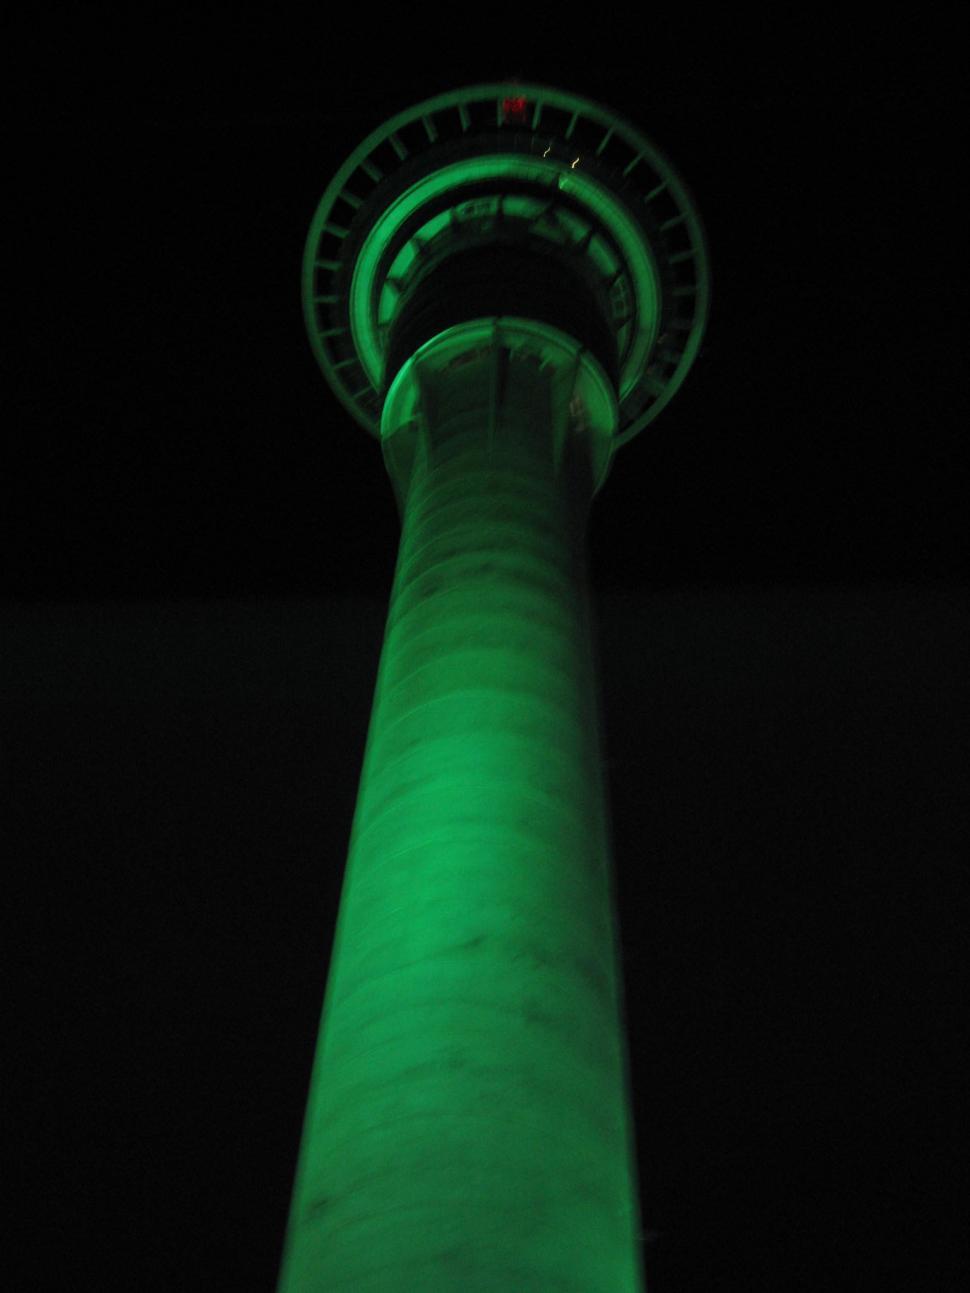 Free Image of Sky Tower Auckland 